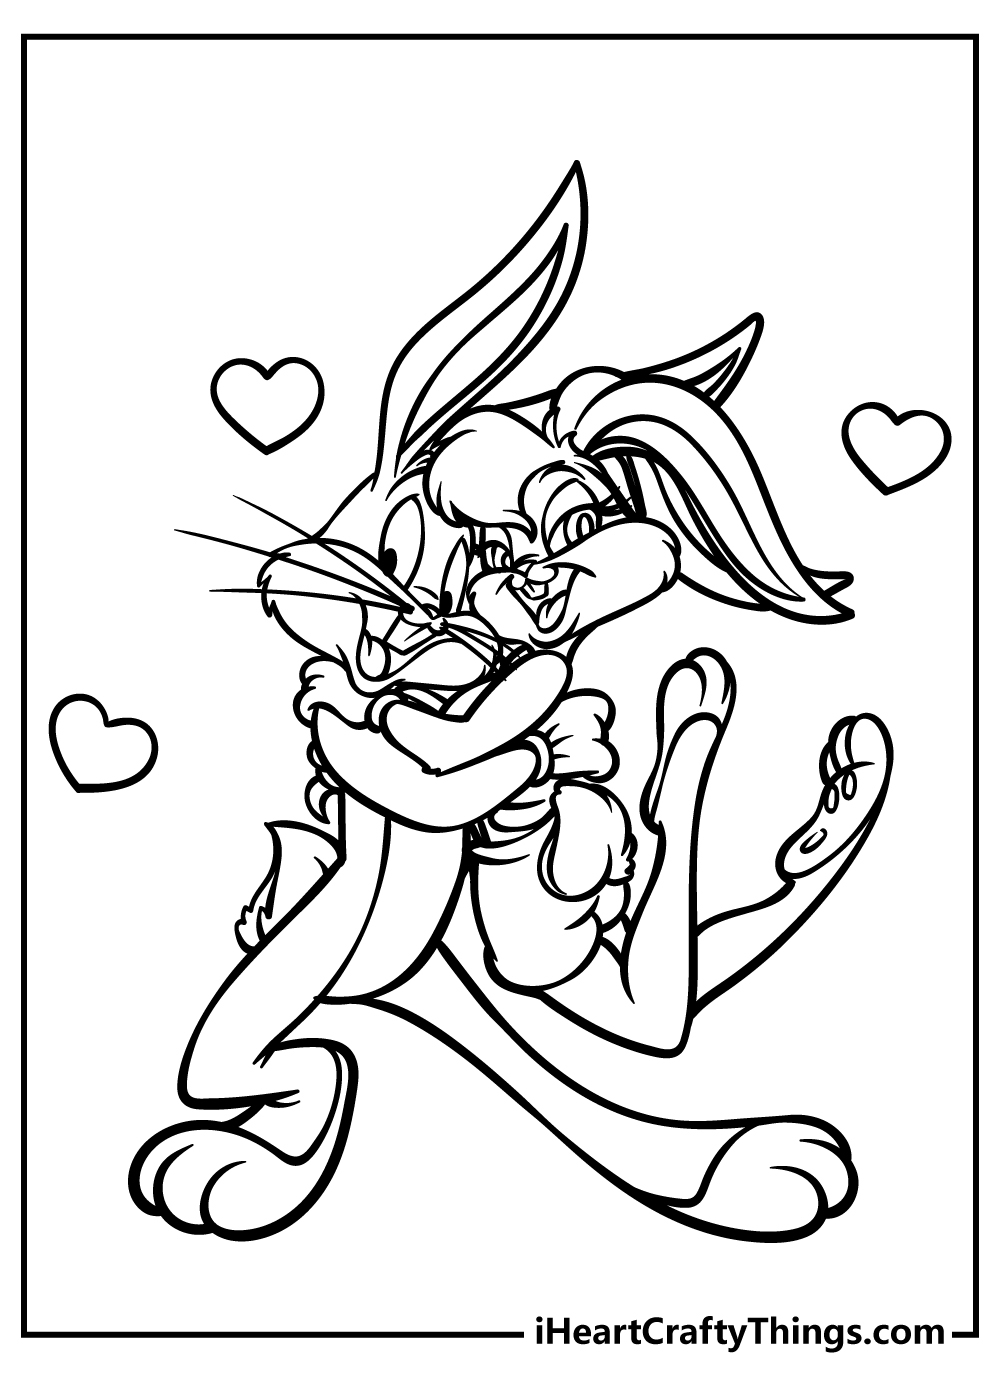 Looney Tunes Coloring Pages 100 Free Printables - Free Printable Bugs Bunny Coloring Pages